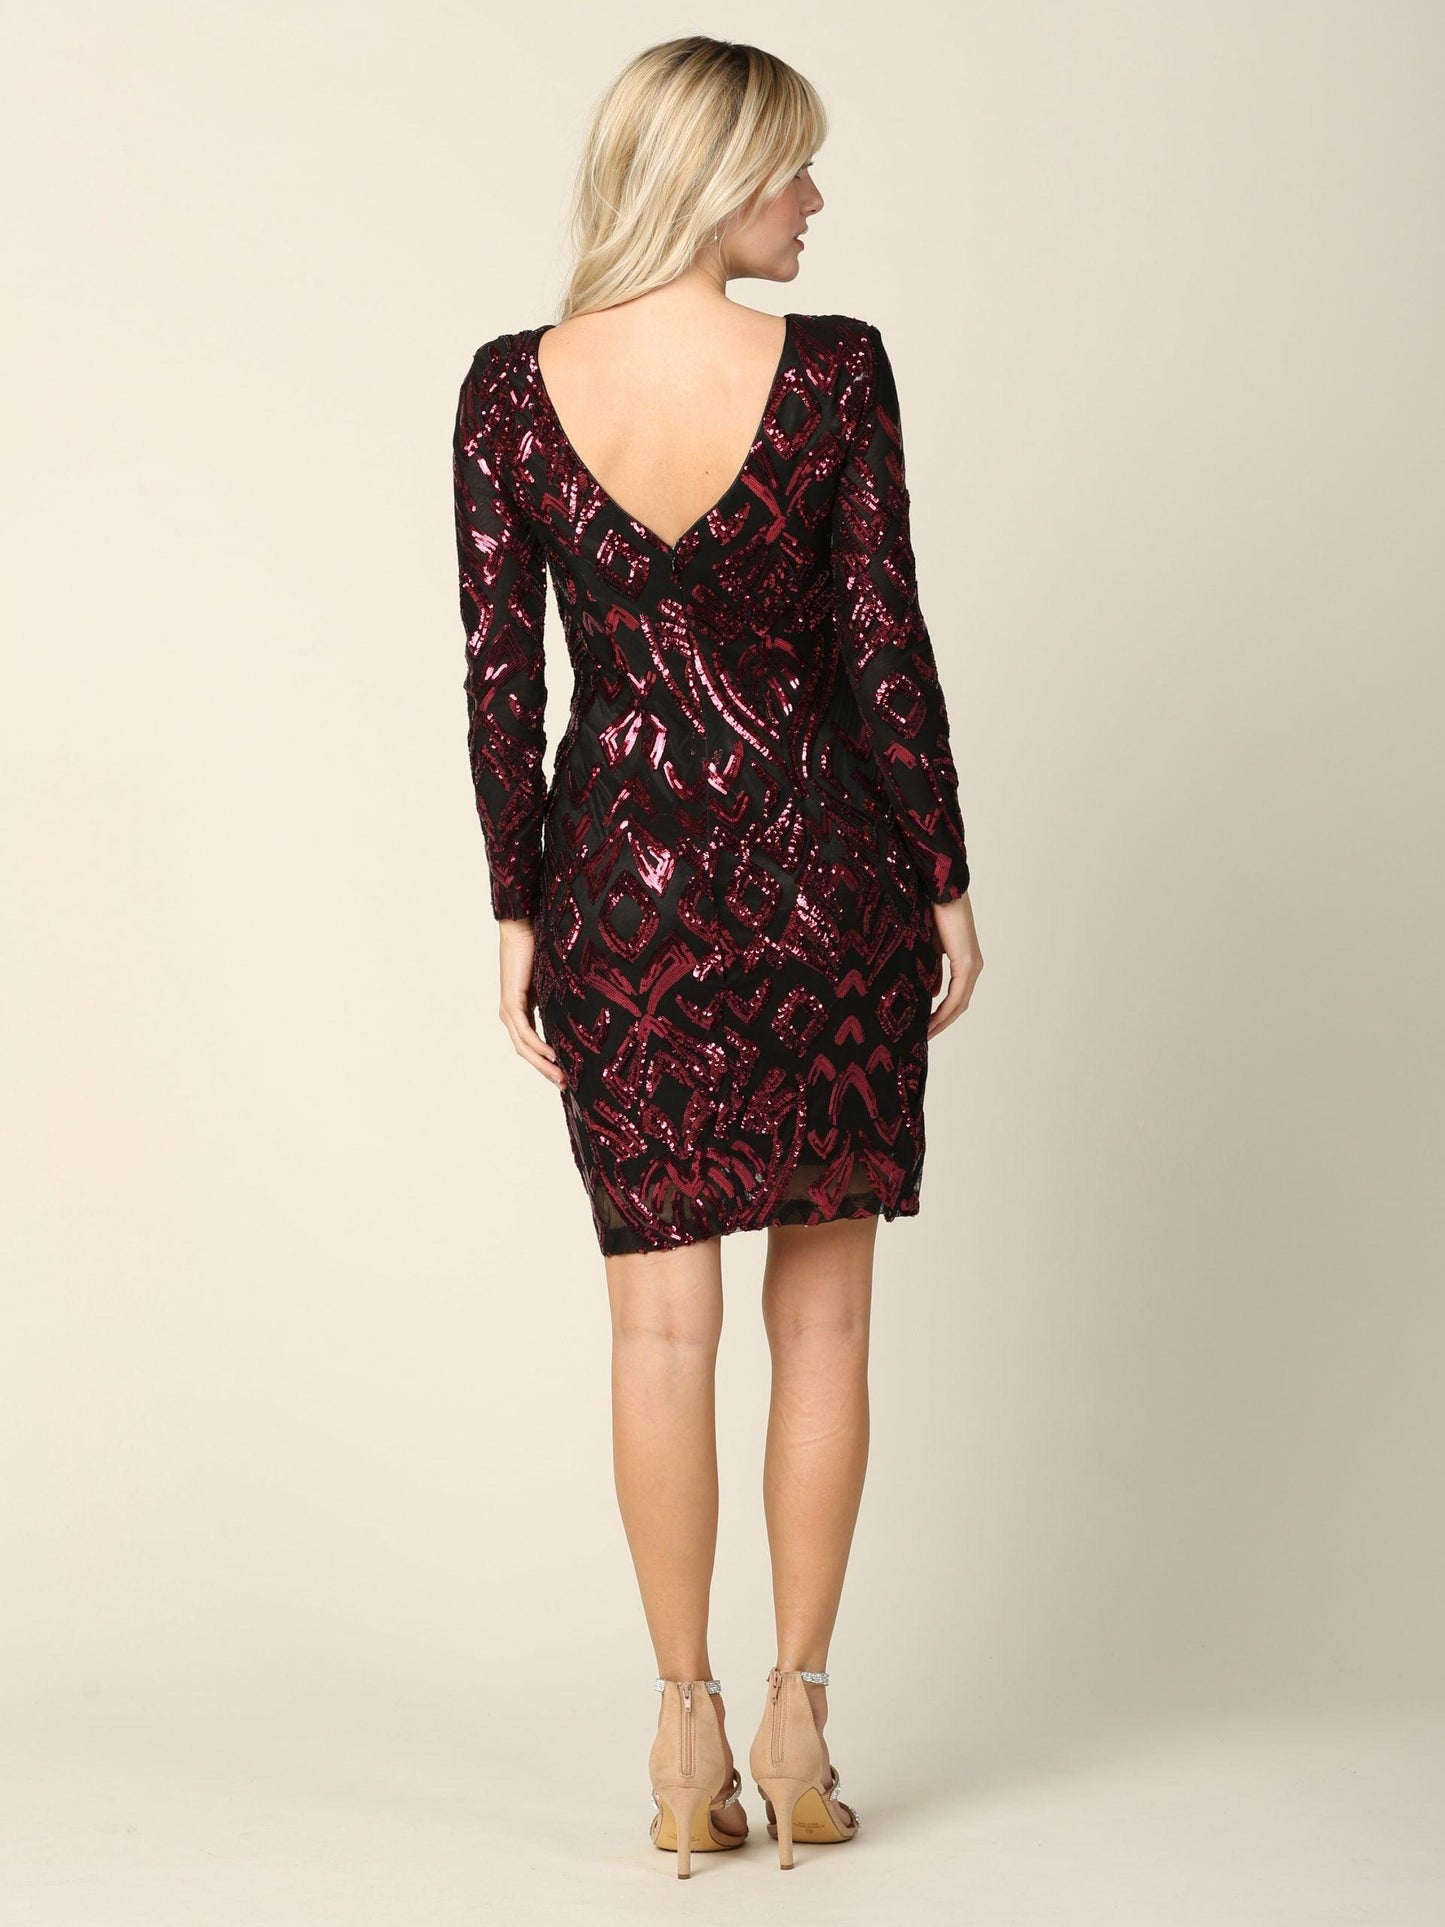 Mini Long Sleeve Sequins Cocktail Dress - The Dress Outlet